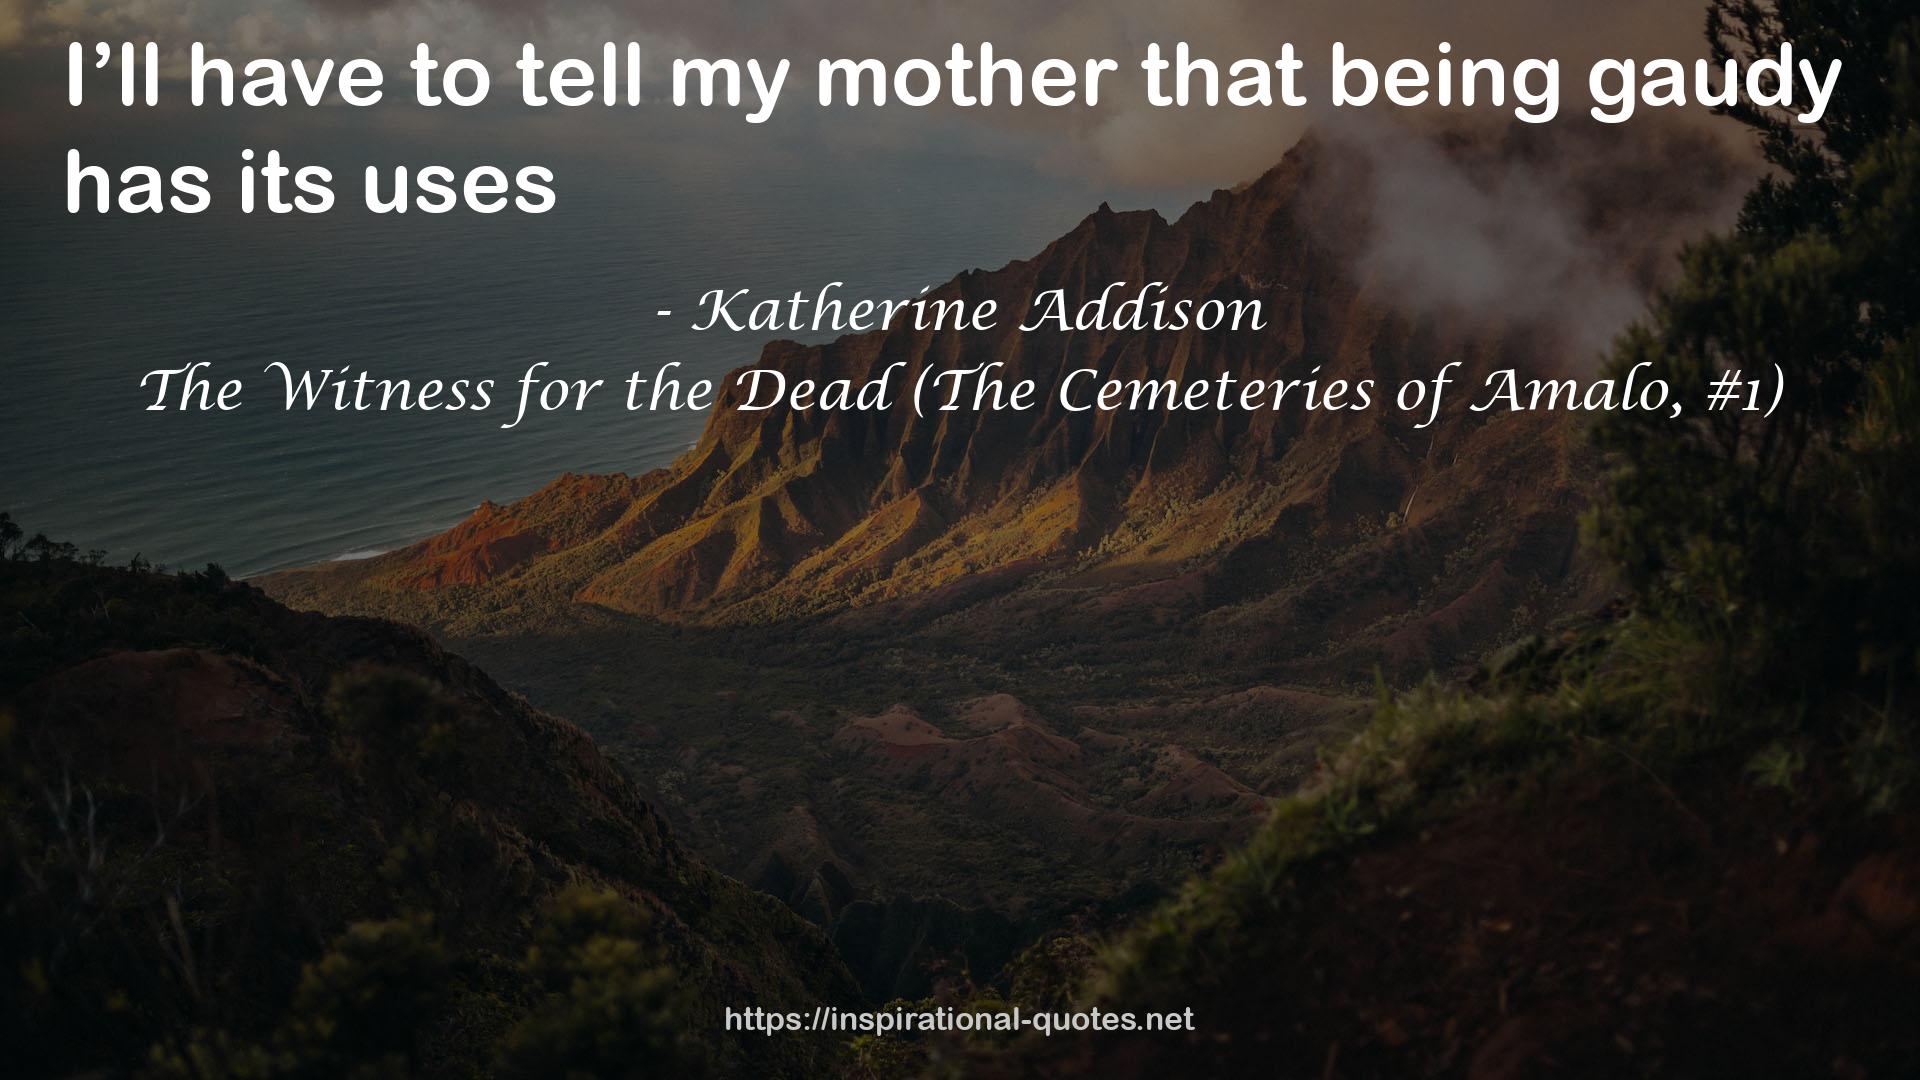 The Witness for the Dead (The Cemeteries of Amalo, #1) QUOTES